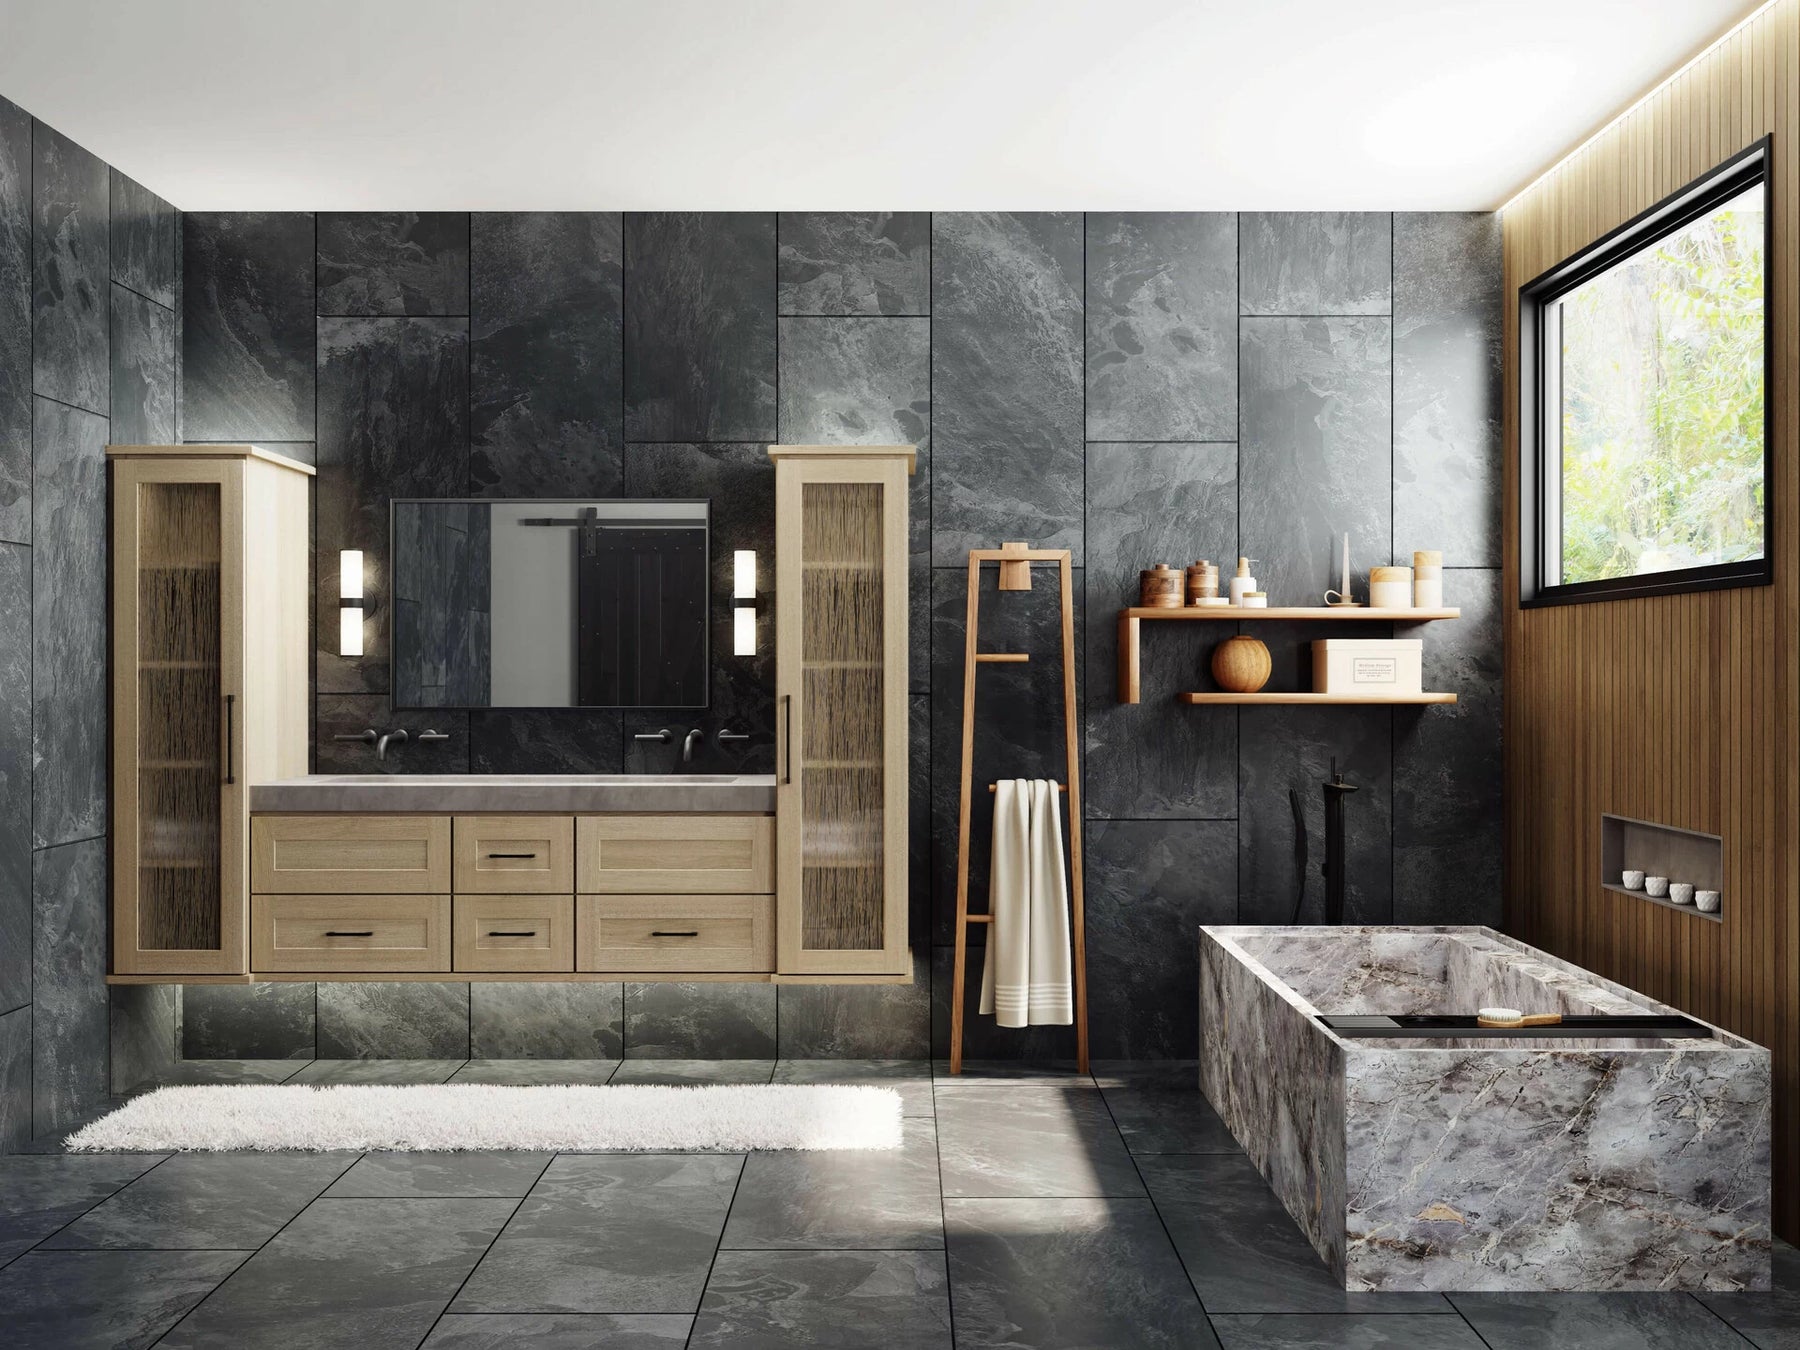 Nº82/Bathroom remodeling is often a popular home improvement project for both new and old homeowners